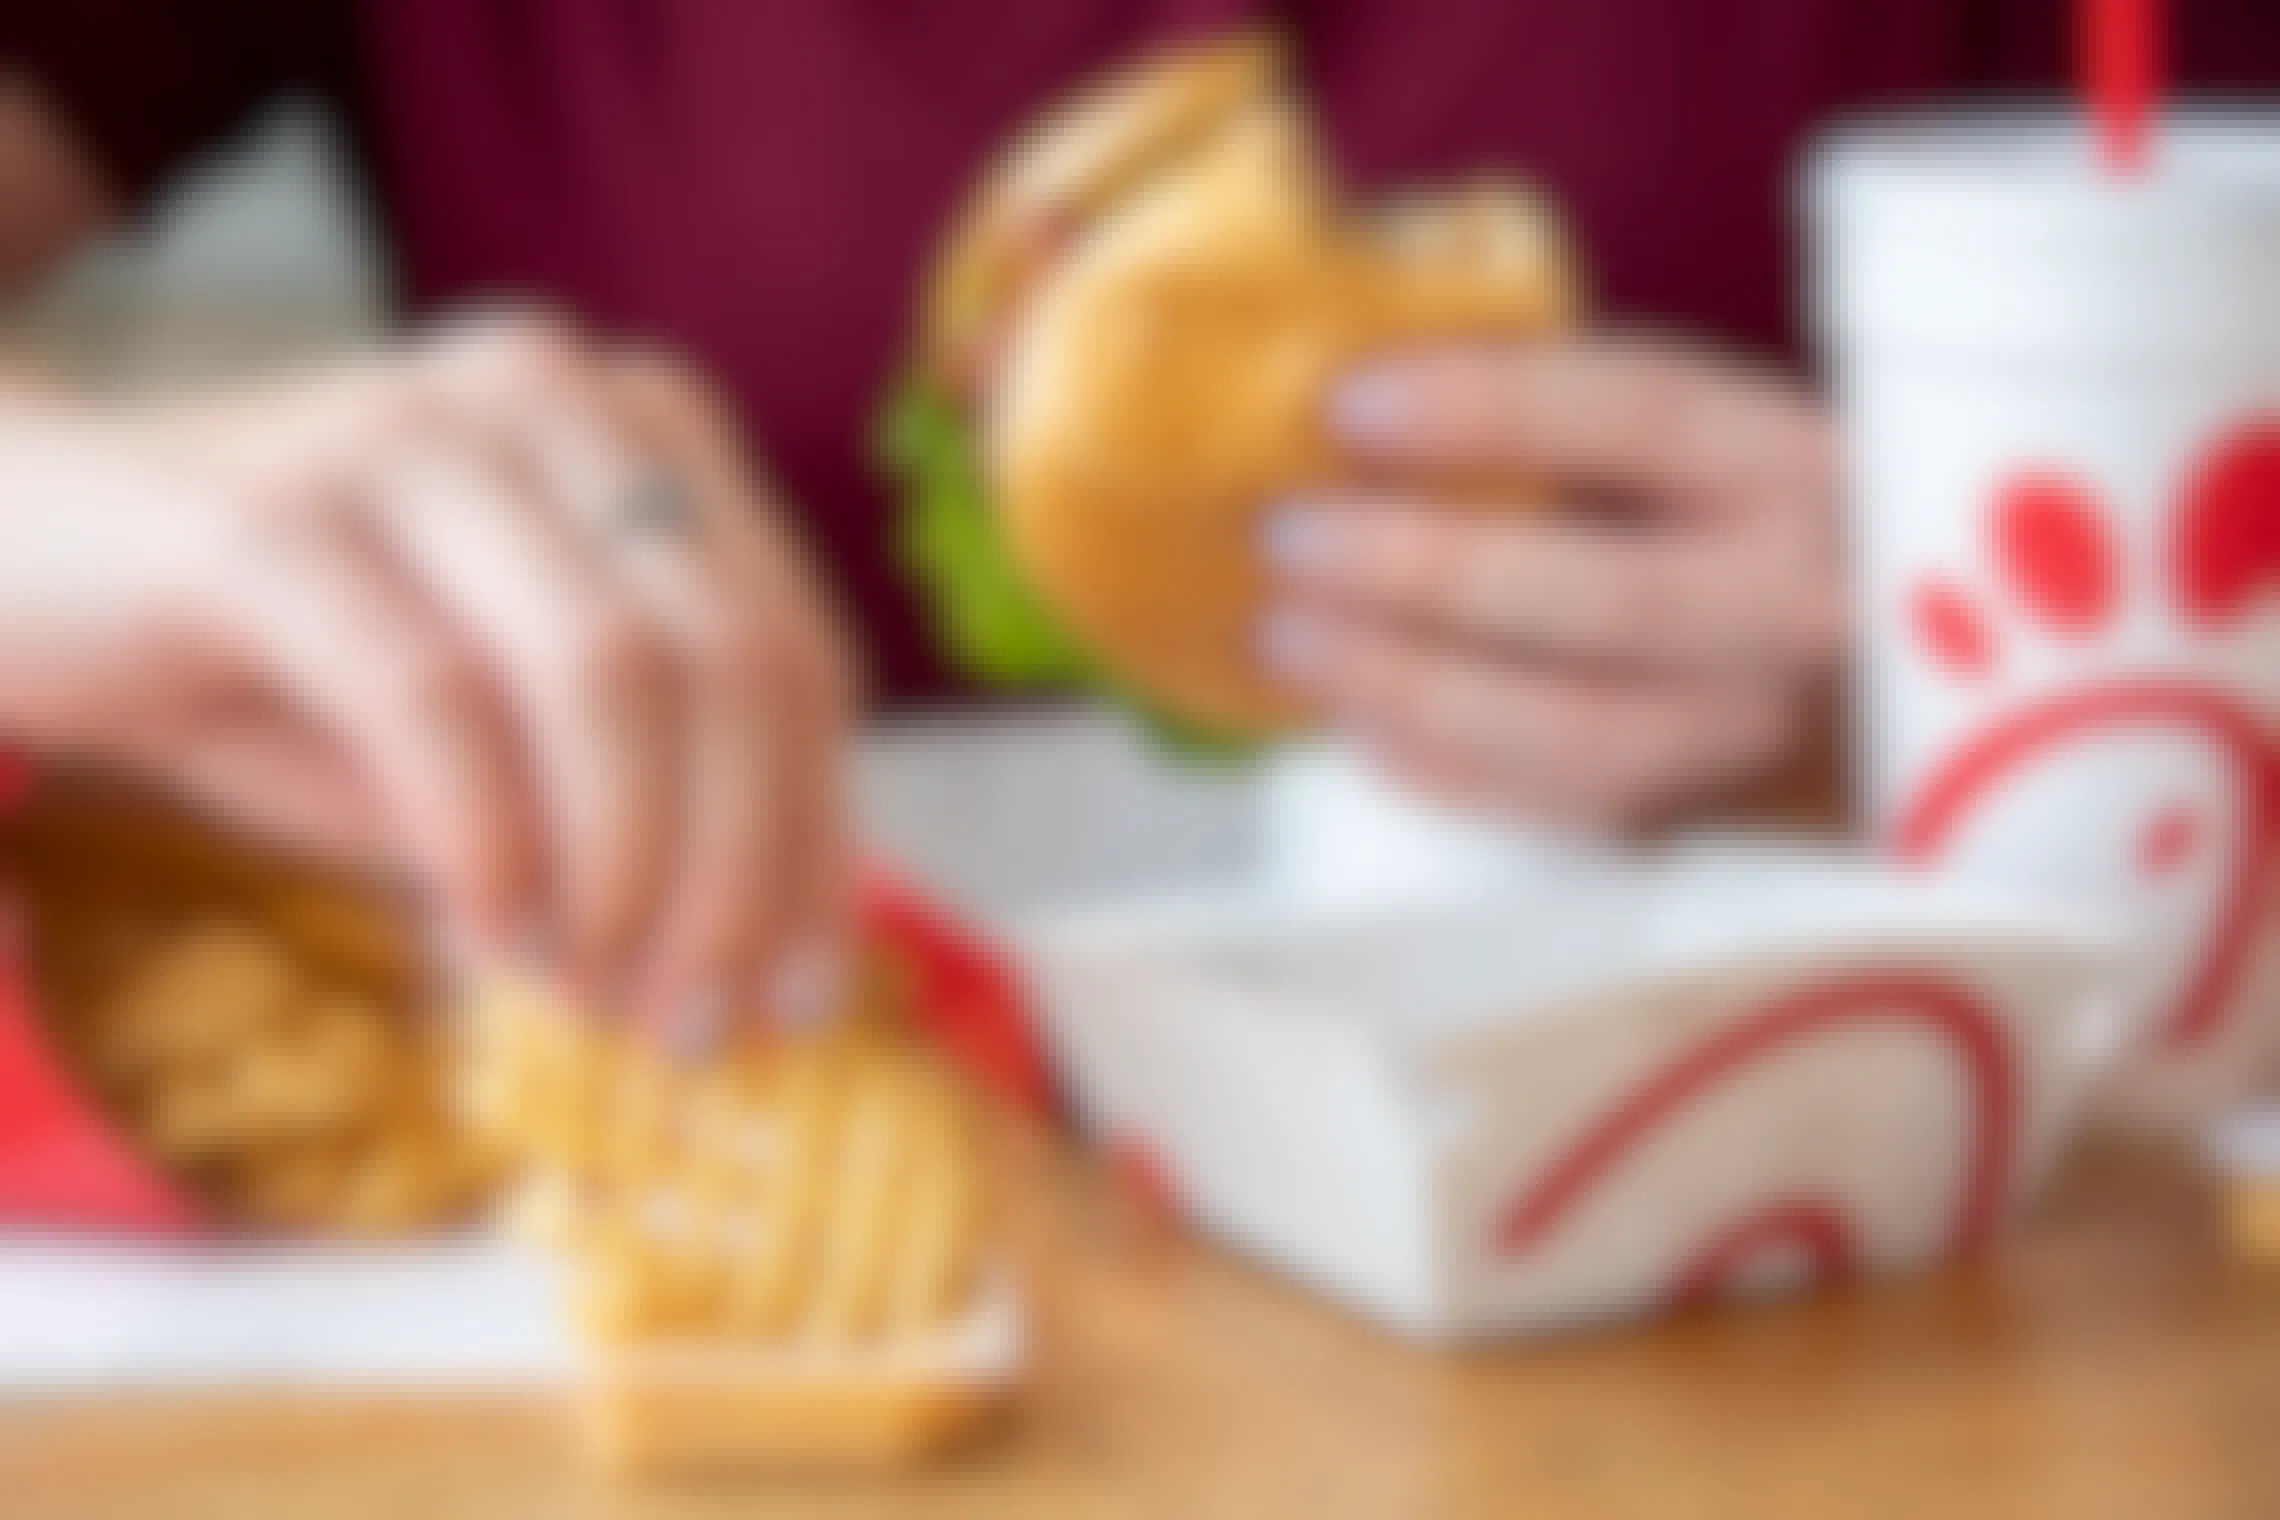 Chick-fil-A Lovers Can Now Order All the "Chikin" They Want Online